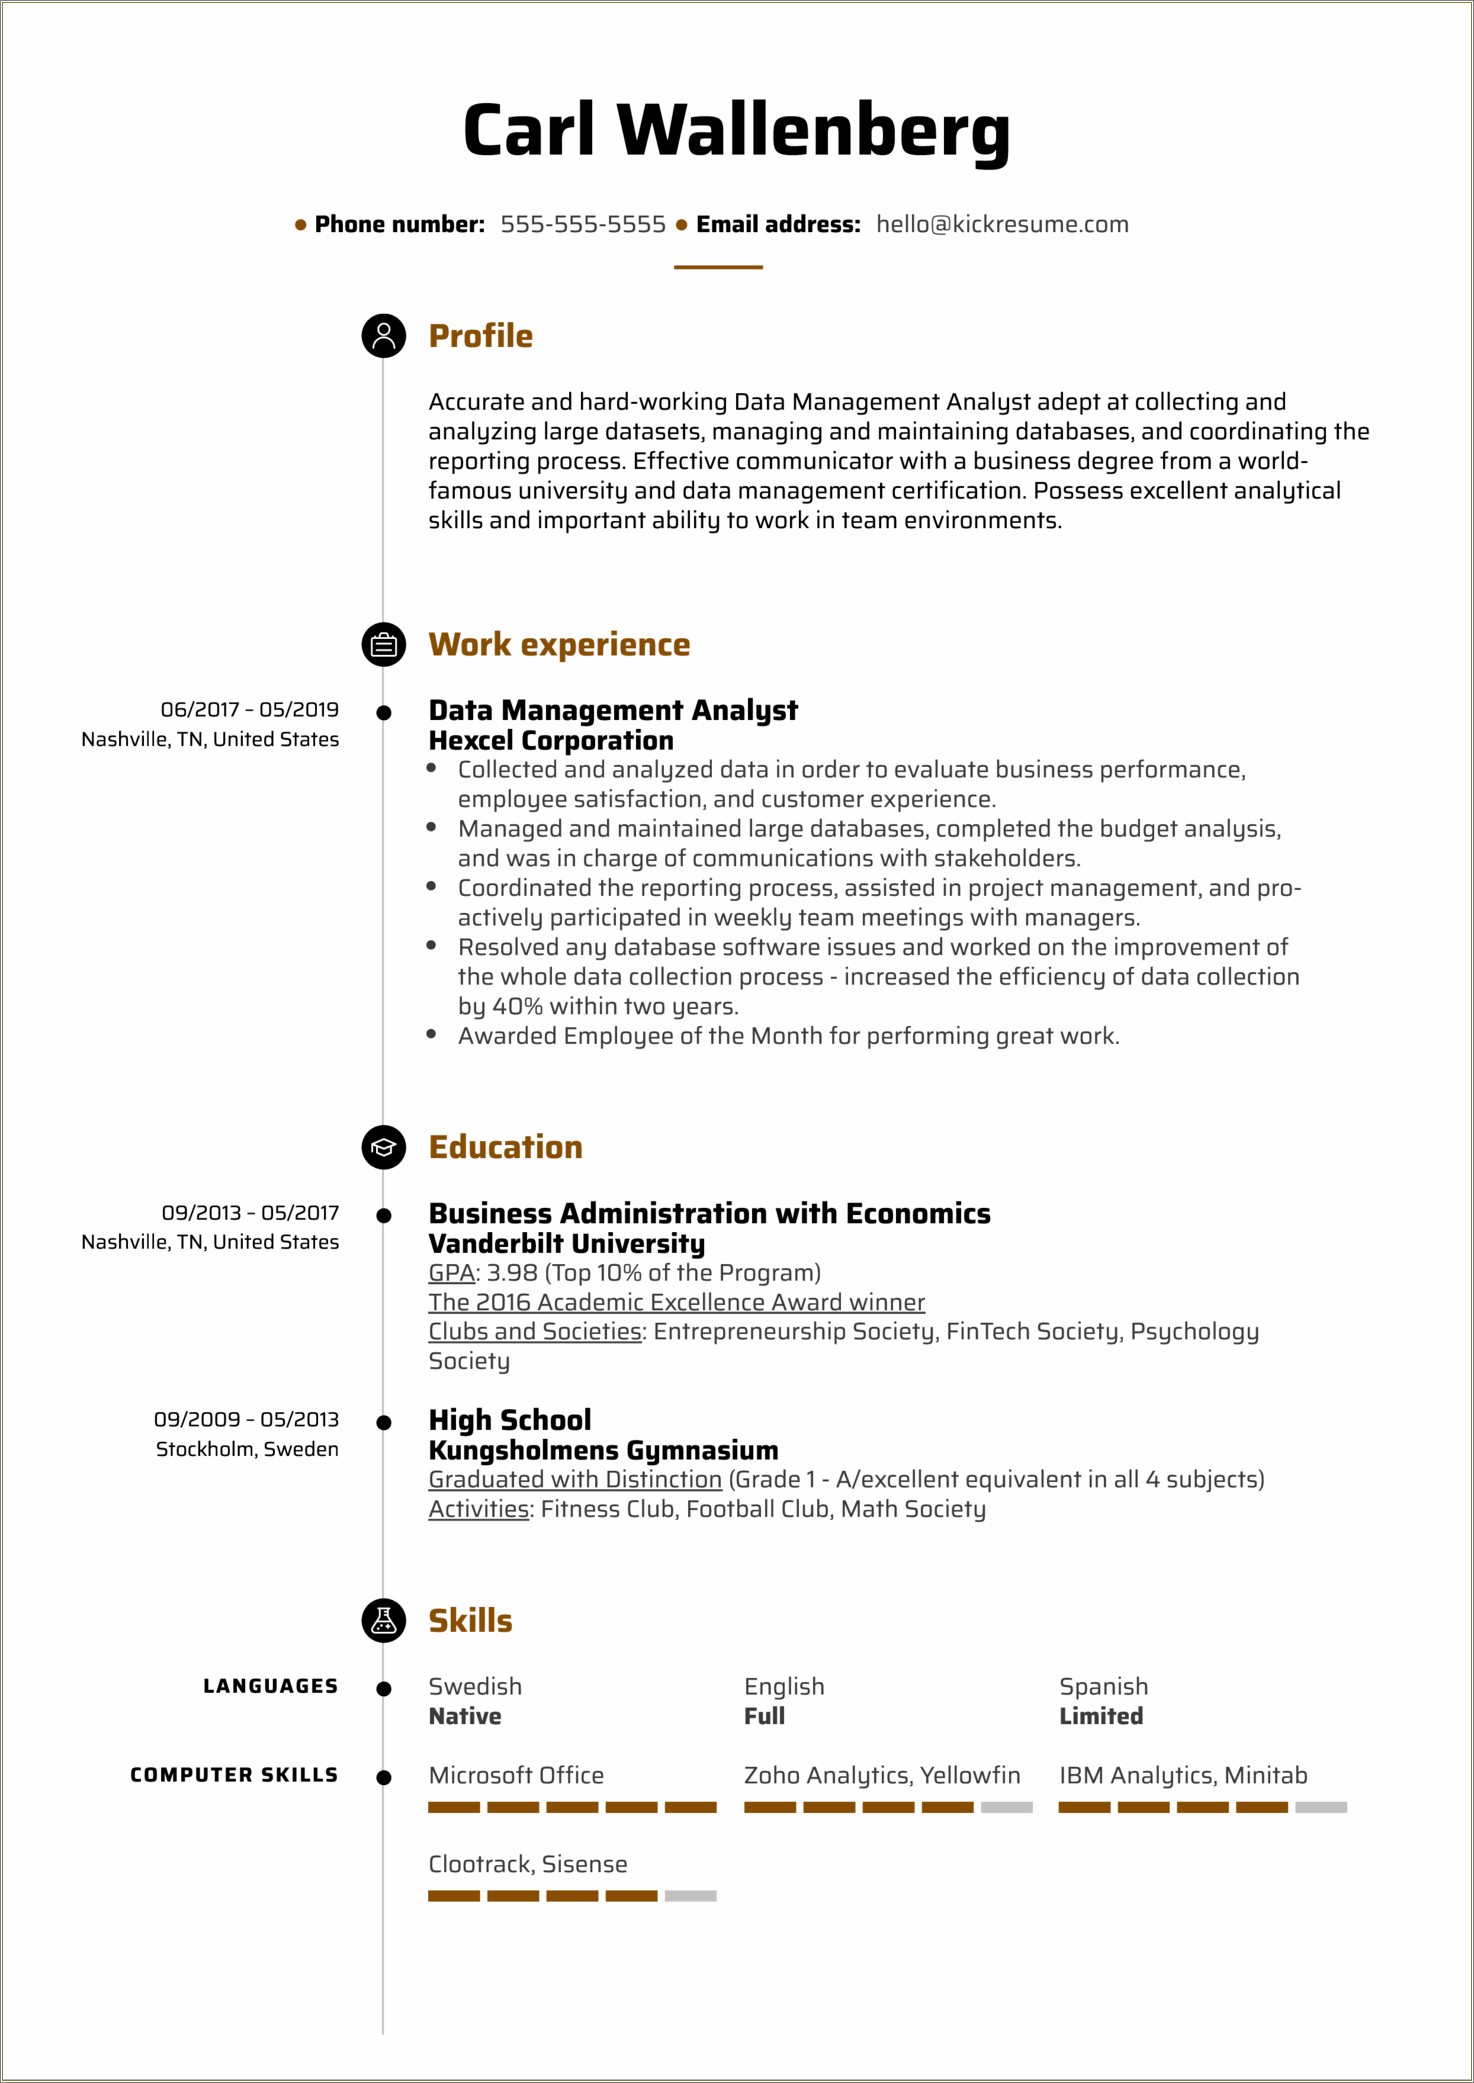 Content Management System Business Analyst Resume